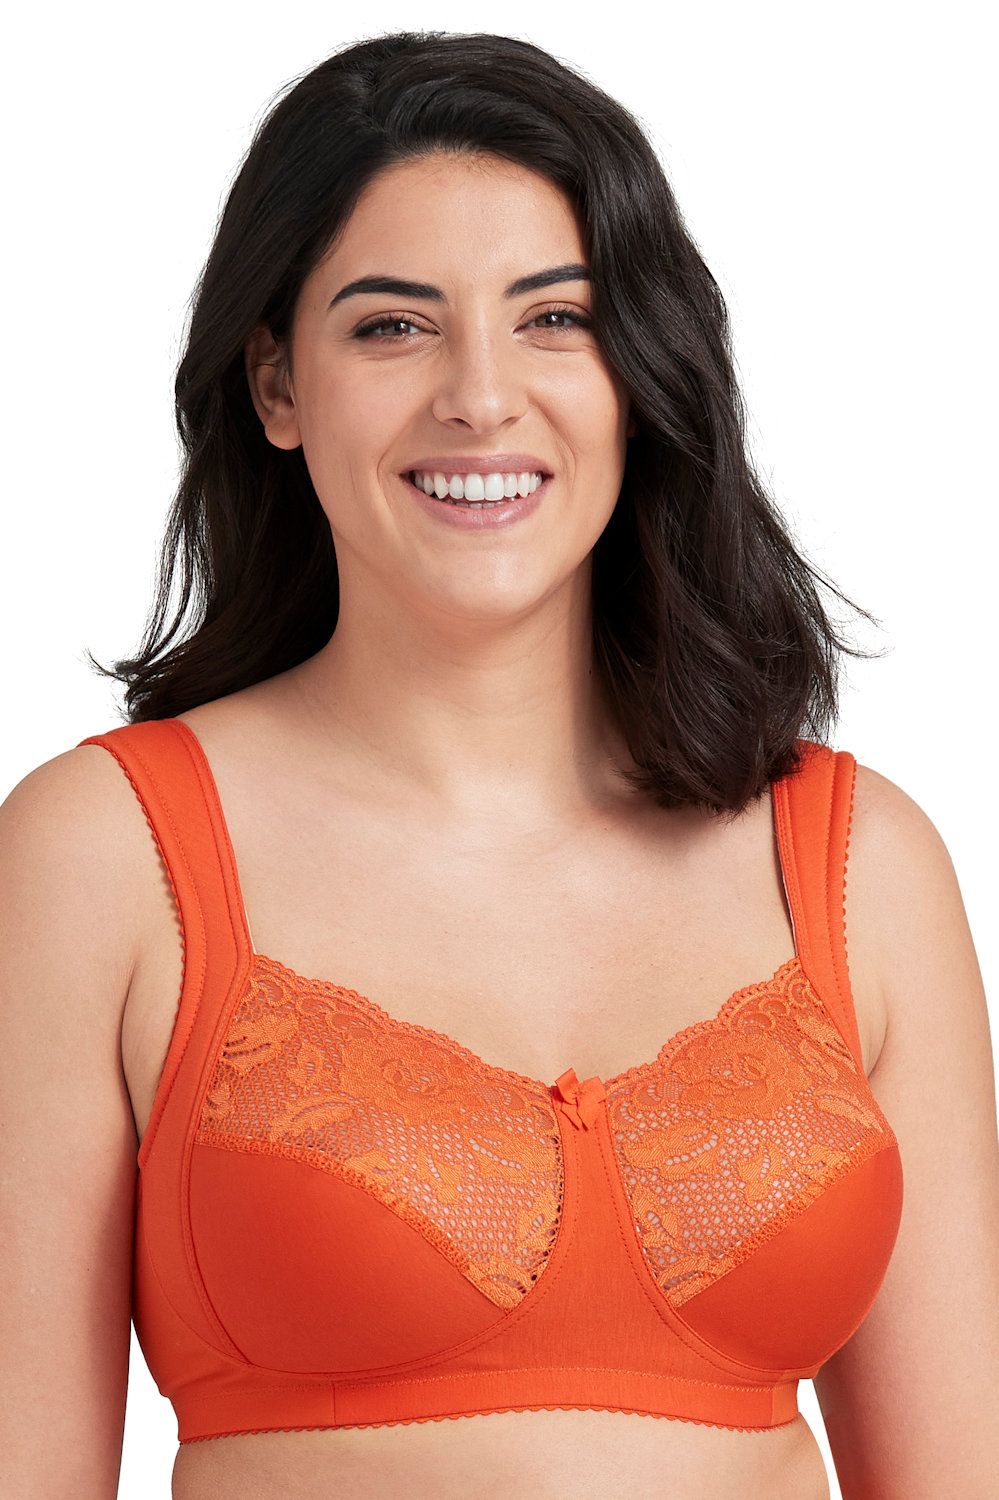 https://www.lumingerie.com/images/products/lovely-lace-2105-kaarituettomat-rintaliivit-oranssi_orig.jpg